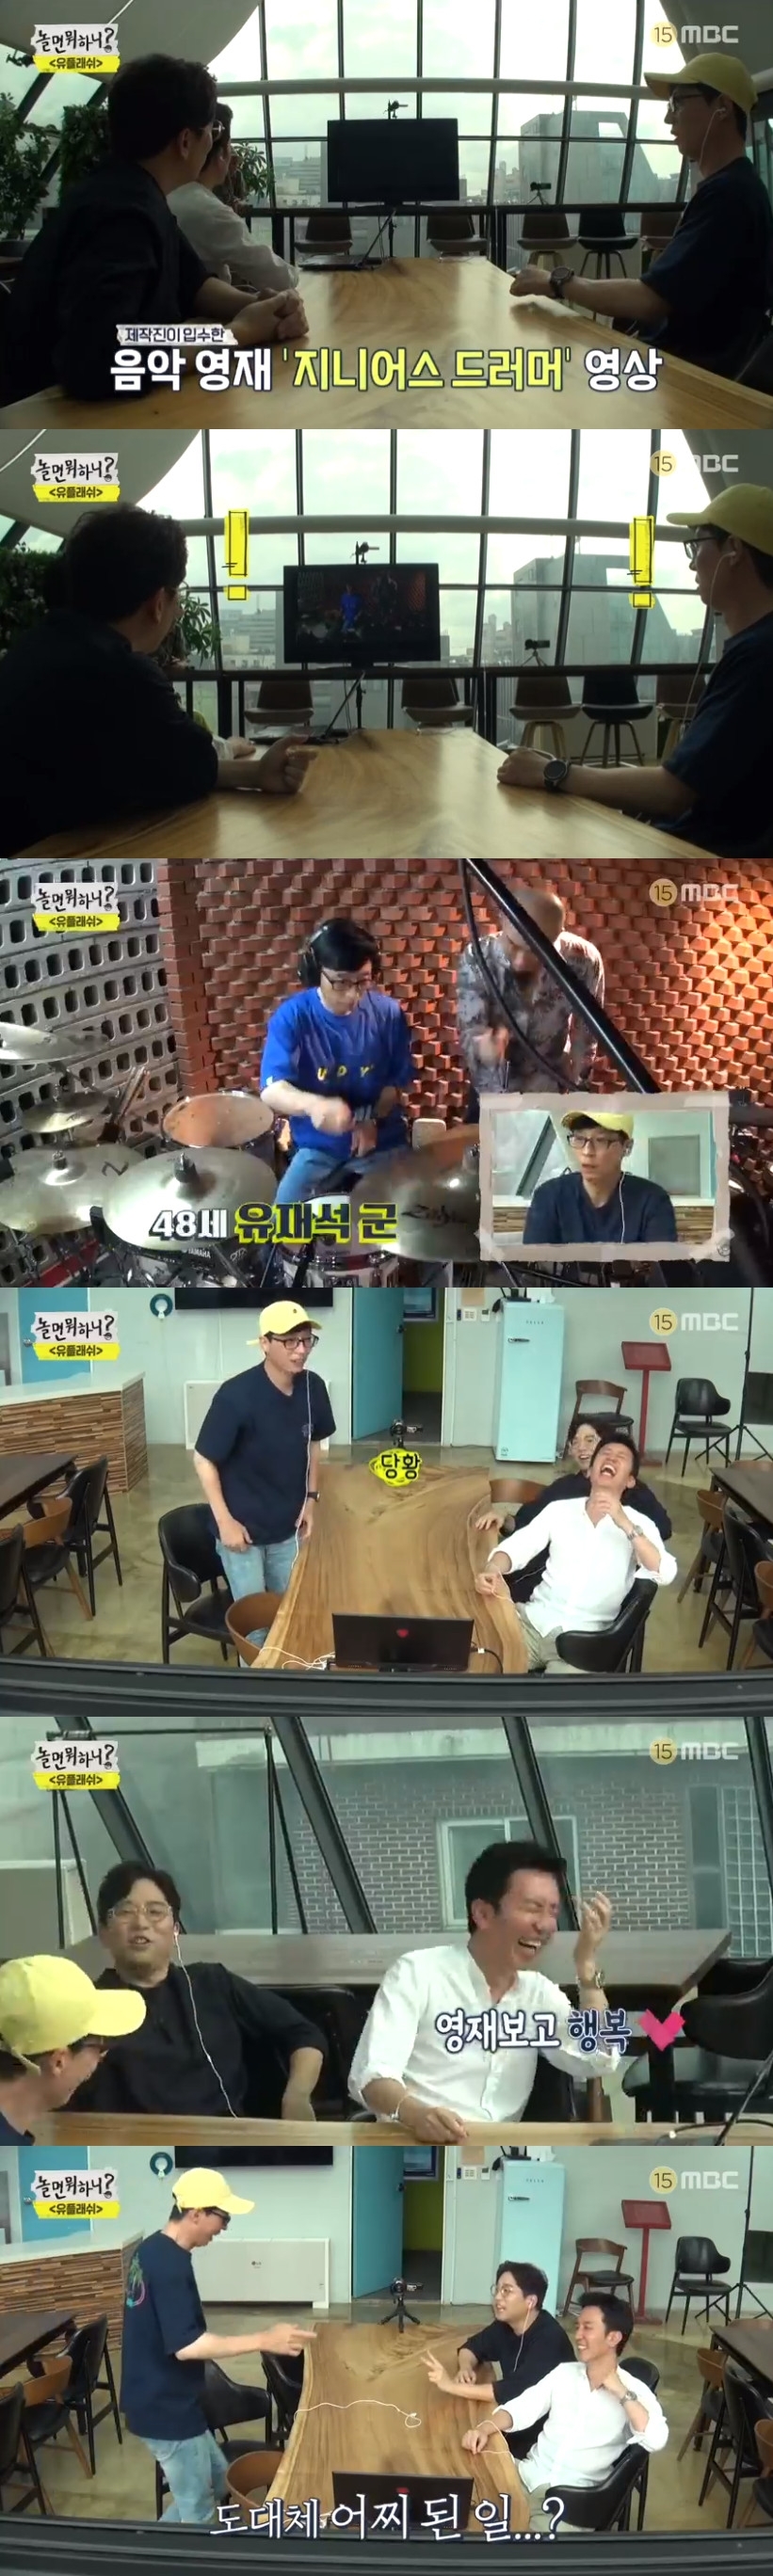 Seoul = = From the performances of actors Lee Gyoo-hyeong and Lee Sung-kyung to the drum Top Model of Yoo Jae-Suk, and the expansion of You Hee-yeol Lee Juck Music, Hangout with Yoo was filled with laughter.MBC Hangout with Yoo, which was broadcasted at 6:30 pm on the 17th, was shown in the apartment of Jo Se-ho, Lee Gyoo-hyeong and Lee Sung-kyung in turn.Existing performers Jo Se-ho and Yunho have been amazed at the appearance of Lee Gyoo-hyeong.Yunho responded that Lee Gyoo-hyeong responded to the TVN drama Spicy Relief Life when he said, Why can not I do it?Yunho also genuinely welcomed Lee Gyoo-hyeong by shaking hands.Lee Sung-kyung followed up, cheering all on the appearance of Lee Sung-kyung, who had a relationship with Taehangho for drama.Jo Se-ho laughed and said, (Lee) Gyu-hyung also likes it.Yoo Jae-Suk also said, I didnt know the Bible would come, and Yunho also said, Im glad the unexpected came. Yoo Jae-Suk said, I put you all on camera.Im alive and alive, he said of their reaction.A three-way confrontation followed in Jo Se-hos apartment.Lee Gyoo-hyeong laughed as if he were immersed in the role of a prosecutor, and Jo Se-ho was delighted with the successful triangular poetry by attracting gag souls.In particular, Lee Gyoo-hyeong was the top model for tap ball, one of the exercises of body vision enhancement, but unexpectedly made people laugh at the ridiculous body gag.Lee Gyoo-hyeong was more laughing as he focused on tapballing without getting tired.Then, a sock-rolling match was held on the laundry table, divided into teams of Lee Gyoo-hyeong and Yunho, who both started their fights by unwinding themselves before the full-scale match.Yunho, who was the first runner, succeeded in the sock crossing, and Lee Gyoo-hyeong, who was the last runner, succeeded, making both teams a 1:1 tie.Yunho was dramatically successful in the next big match; the product was provided with watermelon bought by Lee Gyoo-hyeong.Next, a Uplash segment was followed by musician You Hee-yeol and Lee Juck.Yoo Jae-Suk laughed and laughed when You Hee-yeol said, Kim Tae-ho PD called me.You Hee-yeol said, Kim PD said come today. He said he had something to say. I thought I would talk about funding together.You Hee-yeol also laughed at Yoo Jae-Suk by saying, No, I told you that day, I want to not hang out with you.PD Kim Tae-ho informed them, Im going to do a gifted excavation team. I unearthed a Music prodigy. I called it because it didnt seem to be our area.Then, when I clicked on the Genius drummer video, Yoo Jae-Suk appeared and made you Hee-yeol and Lee Juck laugh.Yoo Jae-Suk was angry, saying, What are you doing now? But Kim Tae-ho PD added, Its Genius in three hours.Earlier, Yoo Jae-Suk suddenly learned drums from cherry filter drummer Sonsta and was able to learn the basic three parts of the beat.You Hee-yeol and Lee Juck continue to do this, Dis.Turns out the drum beat was the title song Hangout with Yoo You Hee-yeol said, Theres addiction, theres no such music, and laughed.PD Kim Tae-ho said: Im going to save this talent, Im going to give you two a music sauce.Each one of you can think about what direction this music will go in, then put the music on one like a relay camera and deliver it to the next person.I will make a song later, he said. I will see how the sound source started in the drum will spread. Since then, the three have also made music with their mouths.Kim Tae-ho PD said, I came to the ballad and trot, and Yoo Jae-Suk laughed at those who responded I have a delusional temperament.Kim Tae-ho PD said, I will make a stage and play music here. On the stage there will be only Yoo Jae-Suk.Kim PD also said, I want to have various genre music. He said to You Hee-yeol and Lee Juck, I want different music to come out.Yoo Jae-Suk said, If you two come with music, I will choose.You Hee-yeol and Lee Juck then started making new music on a beat full of writers from Yoo Jae-Suk.It was not an easy task to complete the song, but to make the next person continue the music.Lee Juck tried to send Music to the loading and Sunwoo Jung-ah, raising expectations by saying, Should I send it to my brother Taiji?You Hee-yeol said: I hope the basic instrument comes in, I want to send it to my respectable senior Yoon Sang and sensory guitarist Lee Sang Soon.If you give up that you can not save it, I do not want to write it, but I want to send it to pianist Cho Sung-jin. 